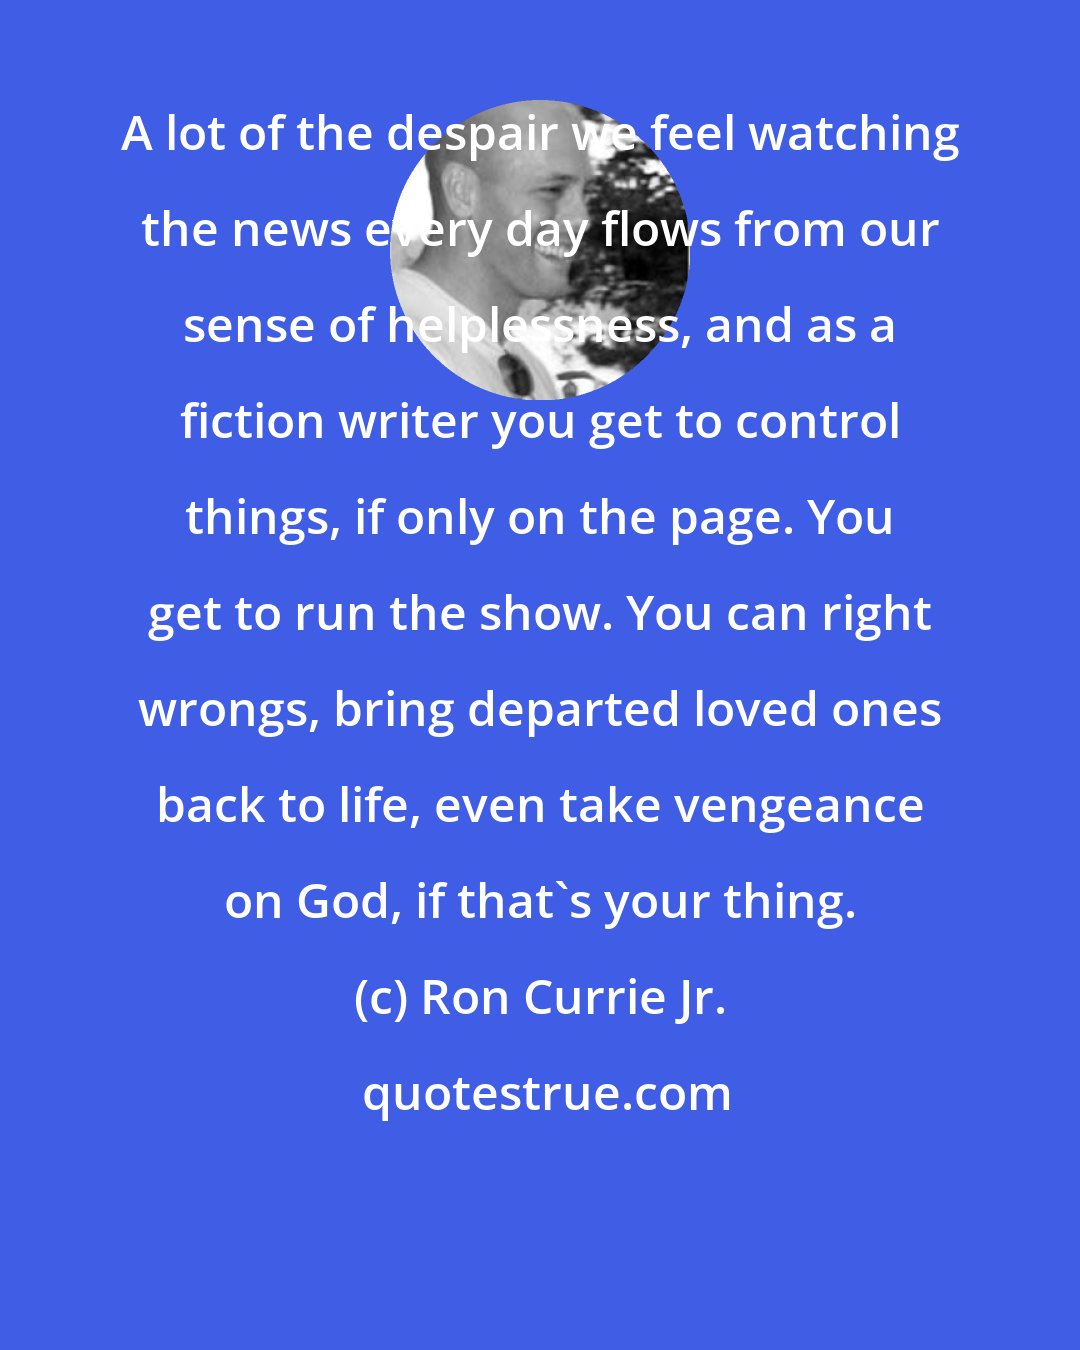 Ron Currie Jr.: A lot of the despair we feel watching the news every day flows from our sense of helplessness, and as a fiction writer you get to control things, if only on the page. You get to run the show. You can right wrongs, bring departed loved ones back to life, even take vengeance on God, if that's your thing.